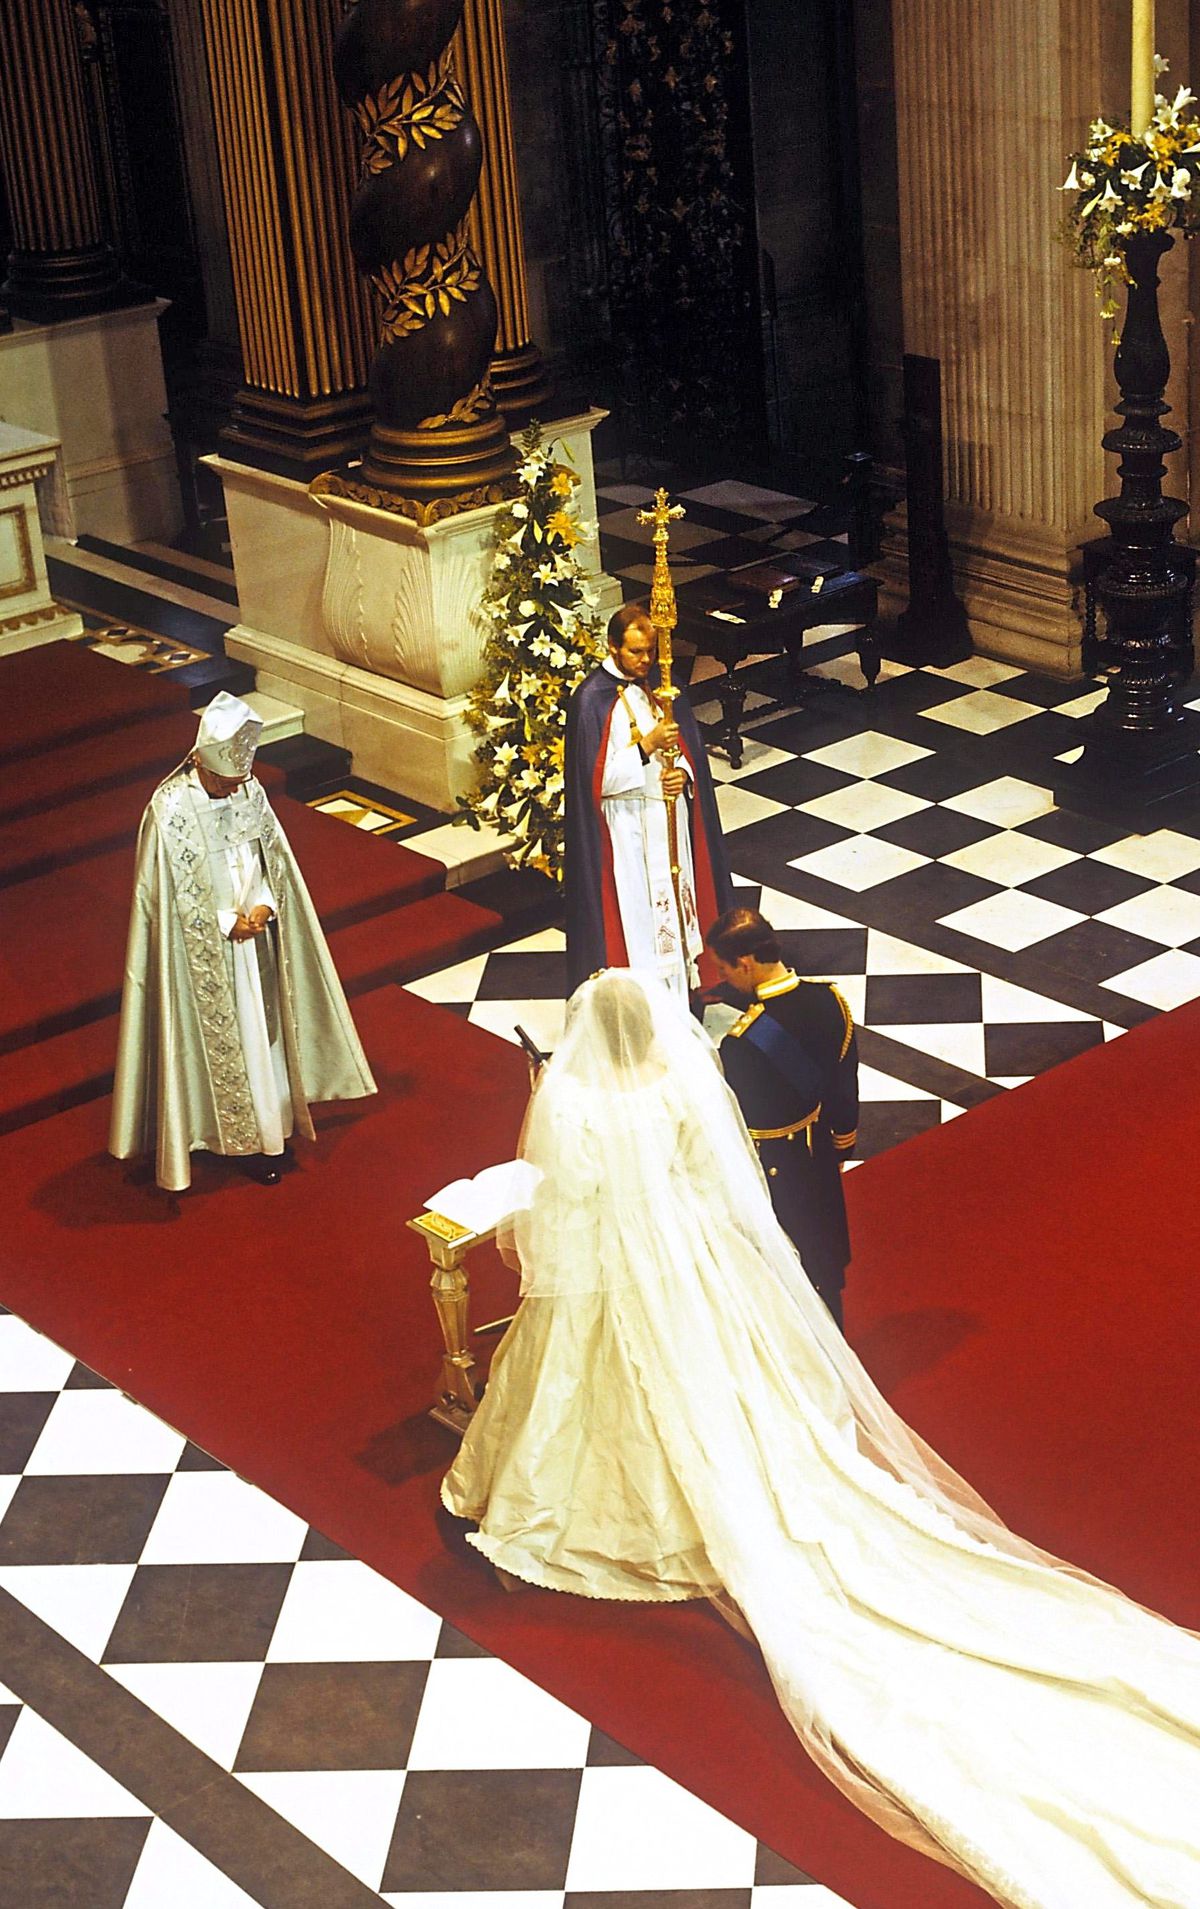 The Royal Wedding, 40 years ago this month